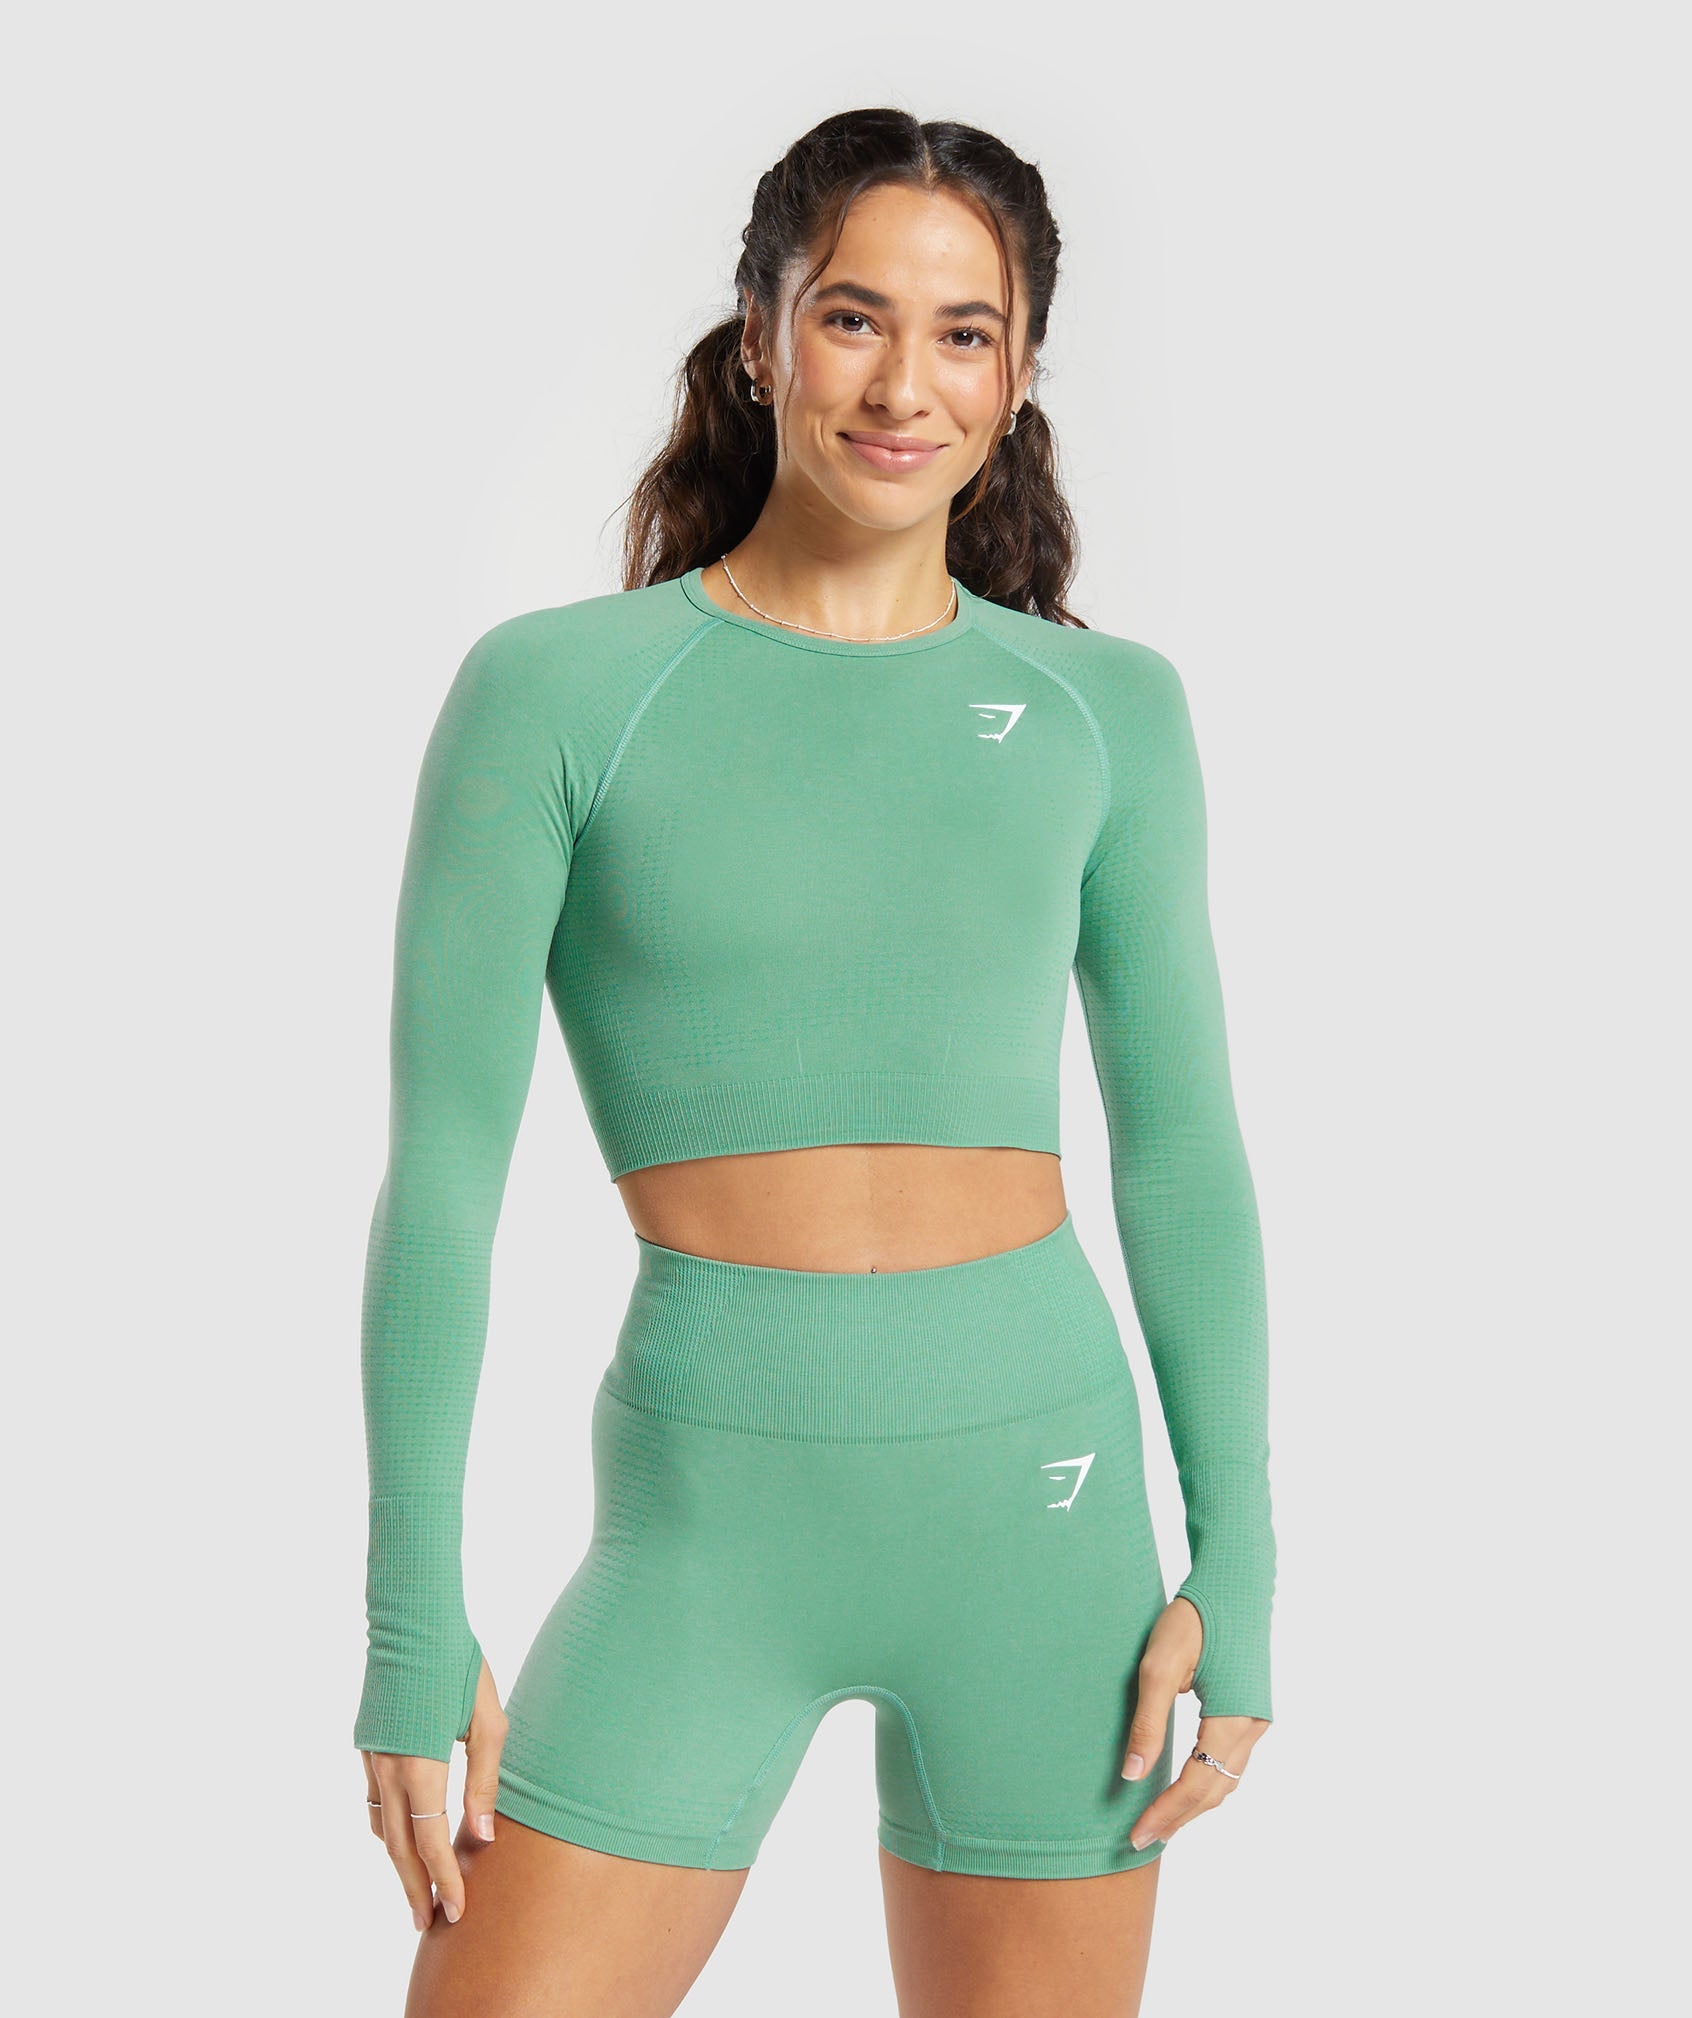 Vital Seamless 2.0 Long Sleeve Crop Top in Lagoon Green/ Marl is out of stock